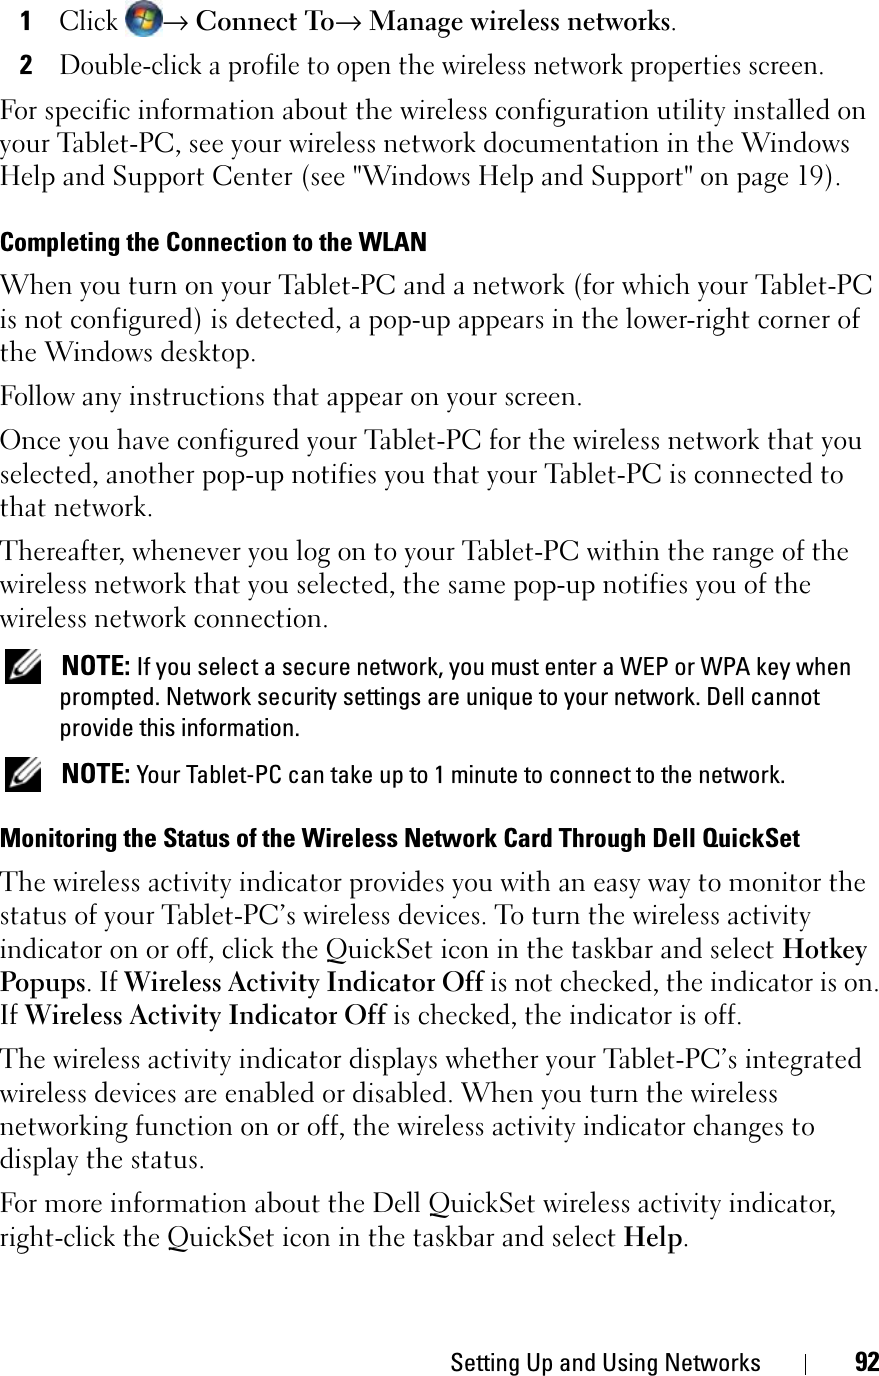 Setting Up and Using Networks 921Click→ Connect To→Manage wireless networks.2Double-click a profile to open the wireless network properties screen.For specific information about the wireless configuration utility installed on your Tablet-PC, see your wireless network documentation in the Windows Help and Support Center (see &quot;Windows Help and Support&quot; on page 19).Completing the Connection to the WLANWhen you turn on your Tablet-PC and a network (for which your Tablet-PC is not configured) is detected, a pop-up appears in the lower-right corner of the Windows desktop. Follow any instructions that appear on your screen.Once you have configured your Tablet-PC for the wireless network that you selected, another pop-up notifies you that your Tablet-PC is connected to that network. Thereafter, whenever you log on to your Tablet-PC within the range of the wireless network that you selected, the same pop-up notifies you of the wireless network connection. NOTE: If you select a secure network, you must enter a WEP or WPA key when prompted. Network security settings are unique to your network. Dell cannot provide this information. NOTE: Your Tablet-PC can take up to 1 minute to connect to the network. Monitoring the Status of the Wireless Network Card Through Dell QuickSetThe wireless activity indicator provides you with an easy way to monitor the status of your Tablet-PC’s wireless devices. To turn the wireless activity indicator on or off, click the QuickSet icon in the taskbar and select HotkeyPopups. If Wireless Activity Indicator Off is not checked, the indicator is on. If Wireless Activity Indicator Off is checked, the indicator is off.The wireless activity indicator displays whether your Tablet-PC’s integrated wireless devices are enabled or disabled. When you turn the wireless networking function on or off, the wireless activity indicator changes to display the status. For more information about the Dell QuickSet wireless activity indicator, right-click the QuickSet icon in the taskbar and select Help.